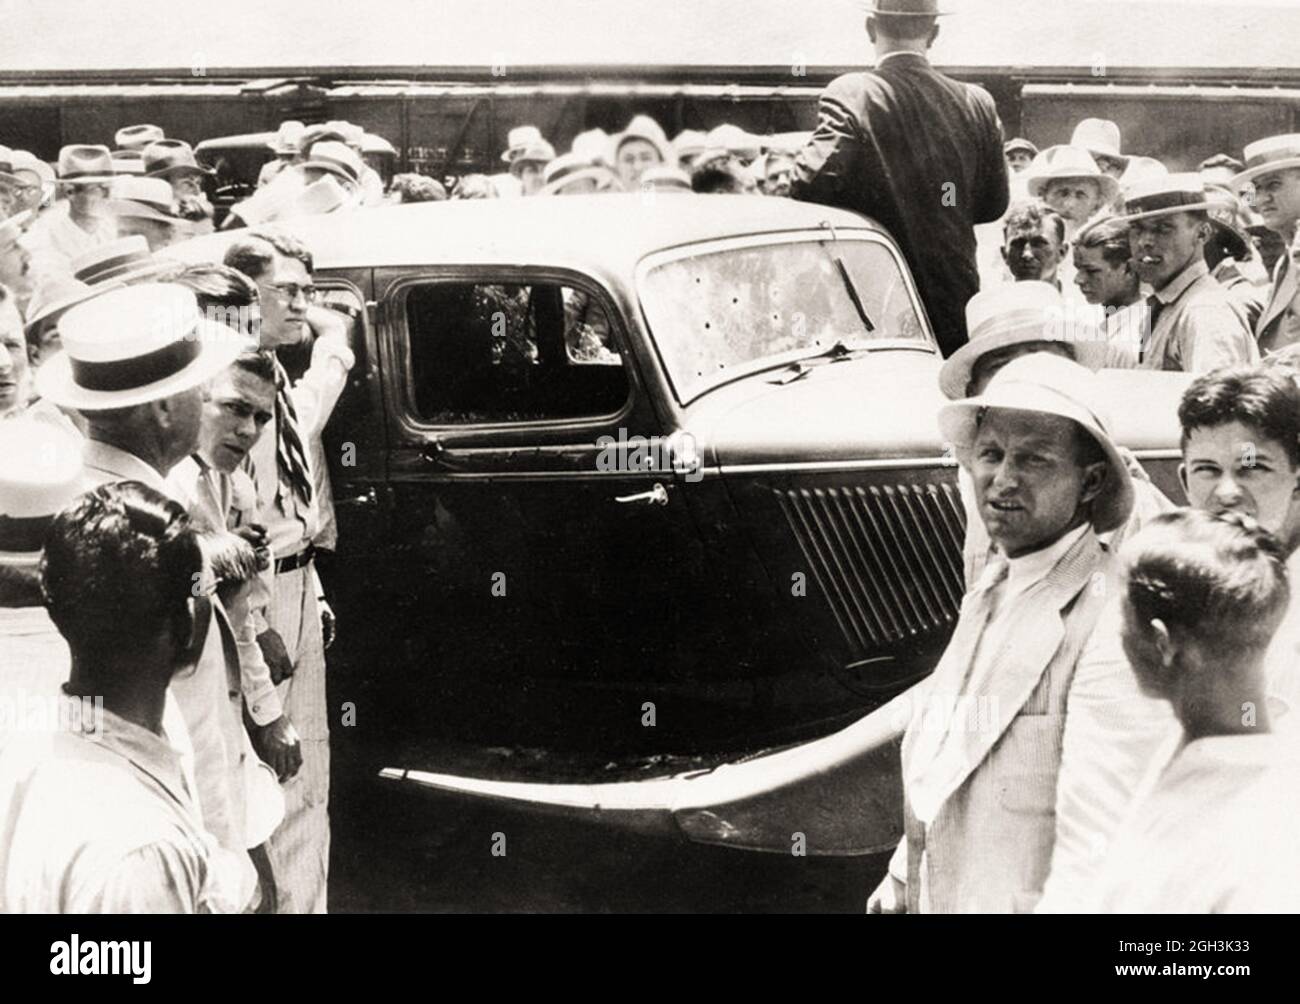 1934 , 23 may , Bienville Parish , Louisiana , USA : The death car of famous gangsterns  BONNIE PARKER  ( 1910 - 1934 ) and CLYDE BARROW ( 1909 - 1934 ) surrended by crowds . The car was towed into town after the ambush . Contrary to popular belief the two never married. They were in a long standing relationship.  The 1932 Ford V8 automobile where  Bonnie and Clyde dead in May 23, 1934 . Unknown photographer . - OUTLAWS - KILLER - ASSASSINO - delinquente - criminalità organizzata  - GANGSTERN - Bos - CRONACA NERA - CRIMINALE - car - automobile - crivellamento di proiettili - folla - gente - pe Stock Photo